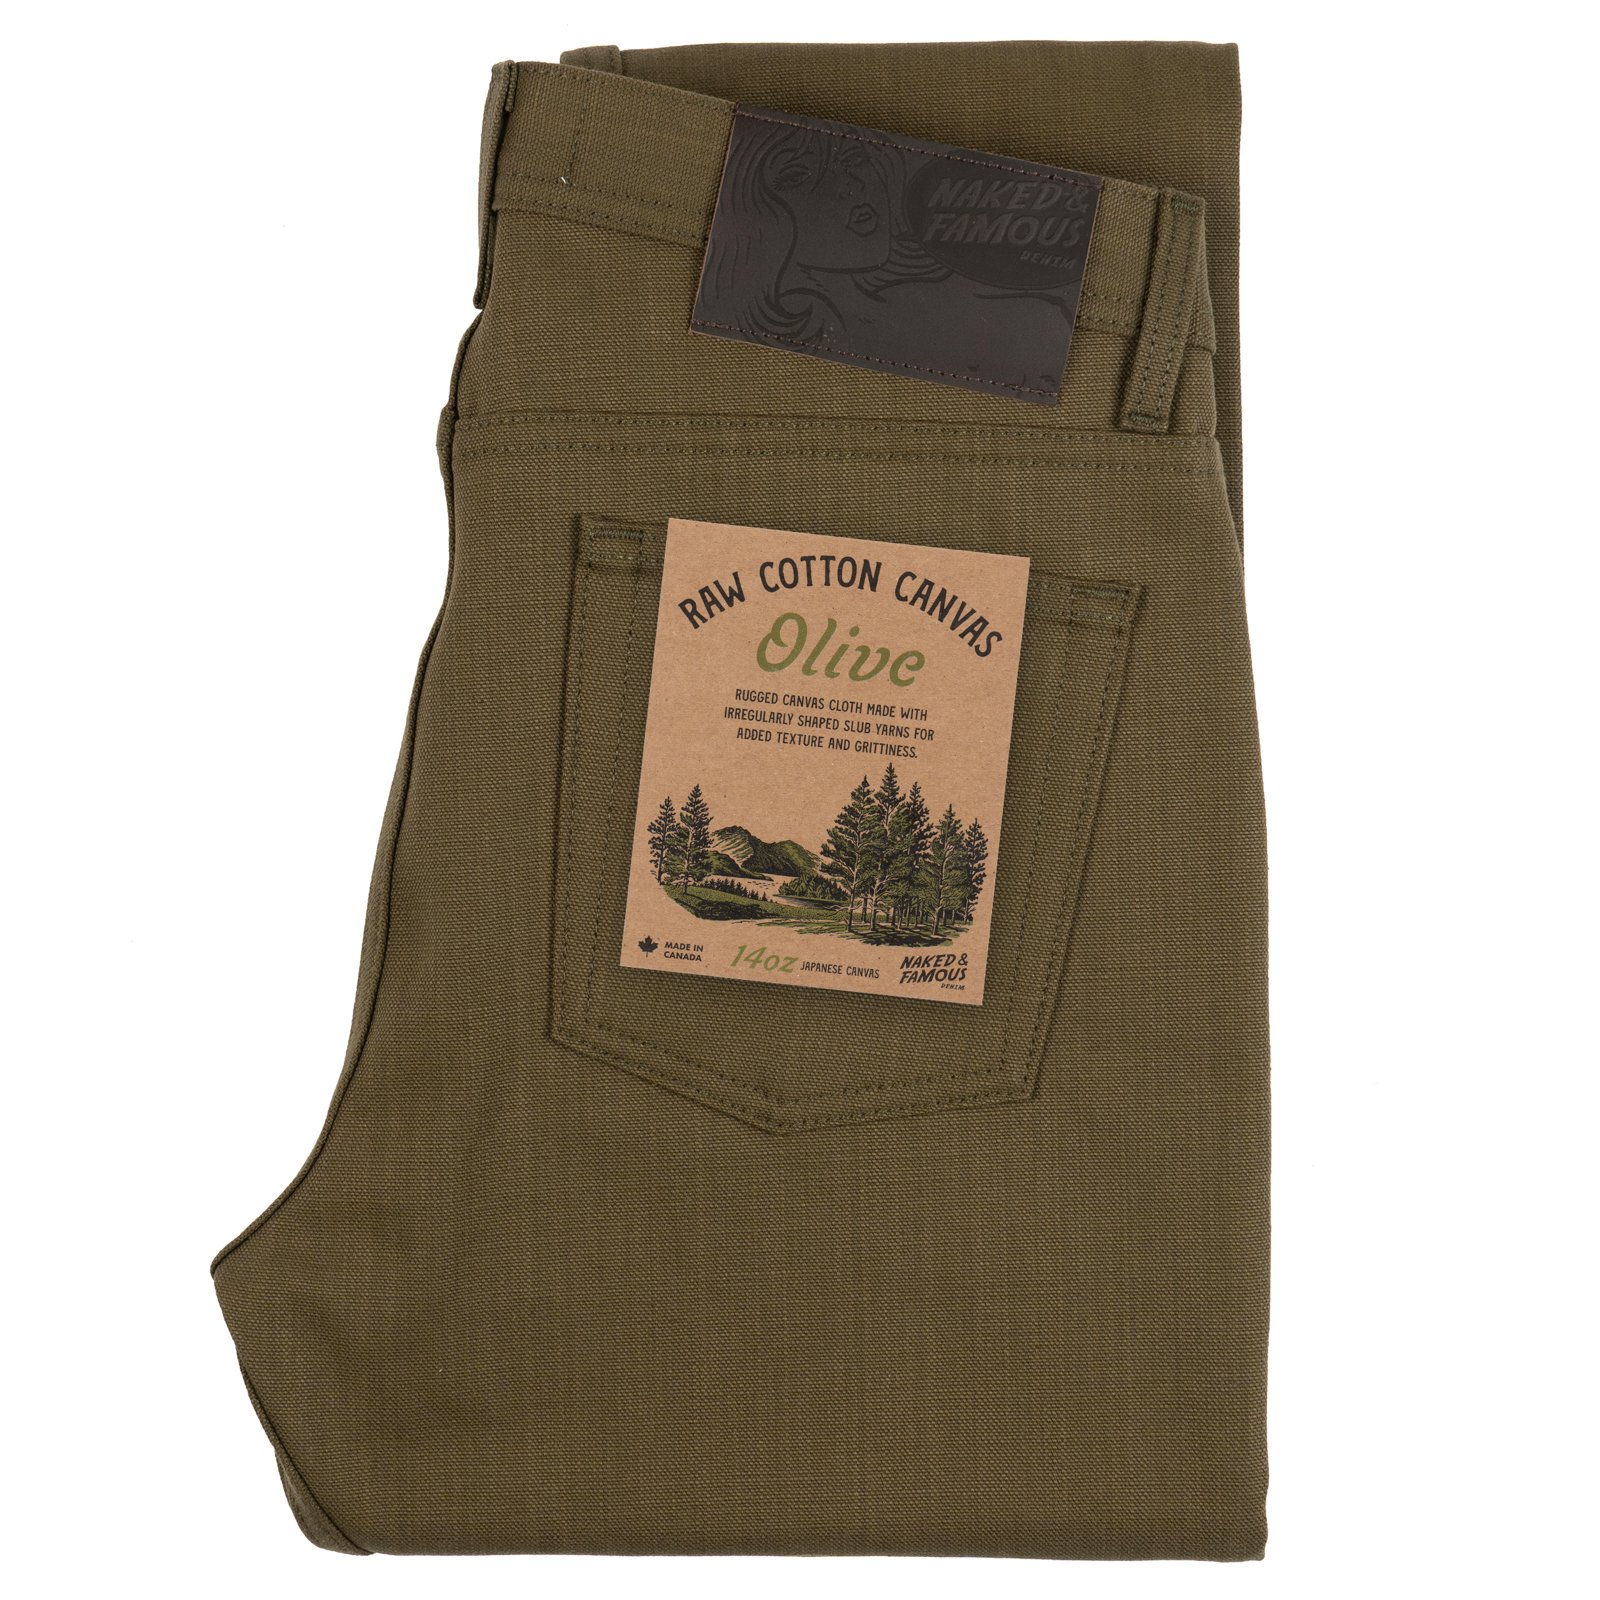  Raw Cotton Canvas - Olive - folded 